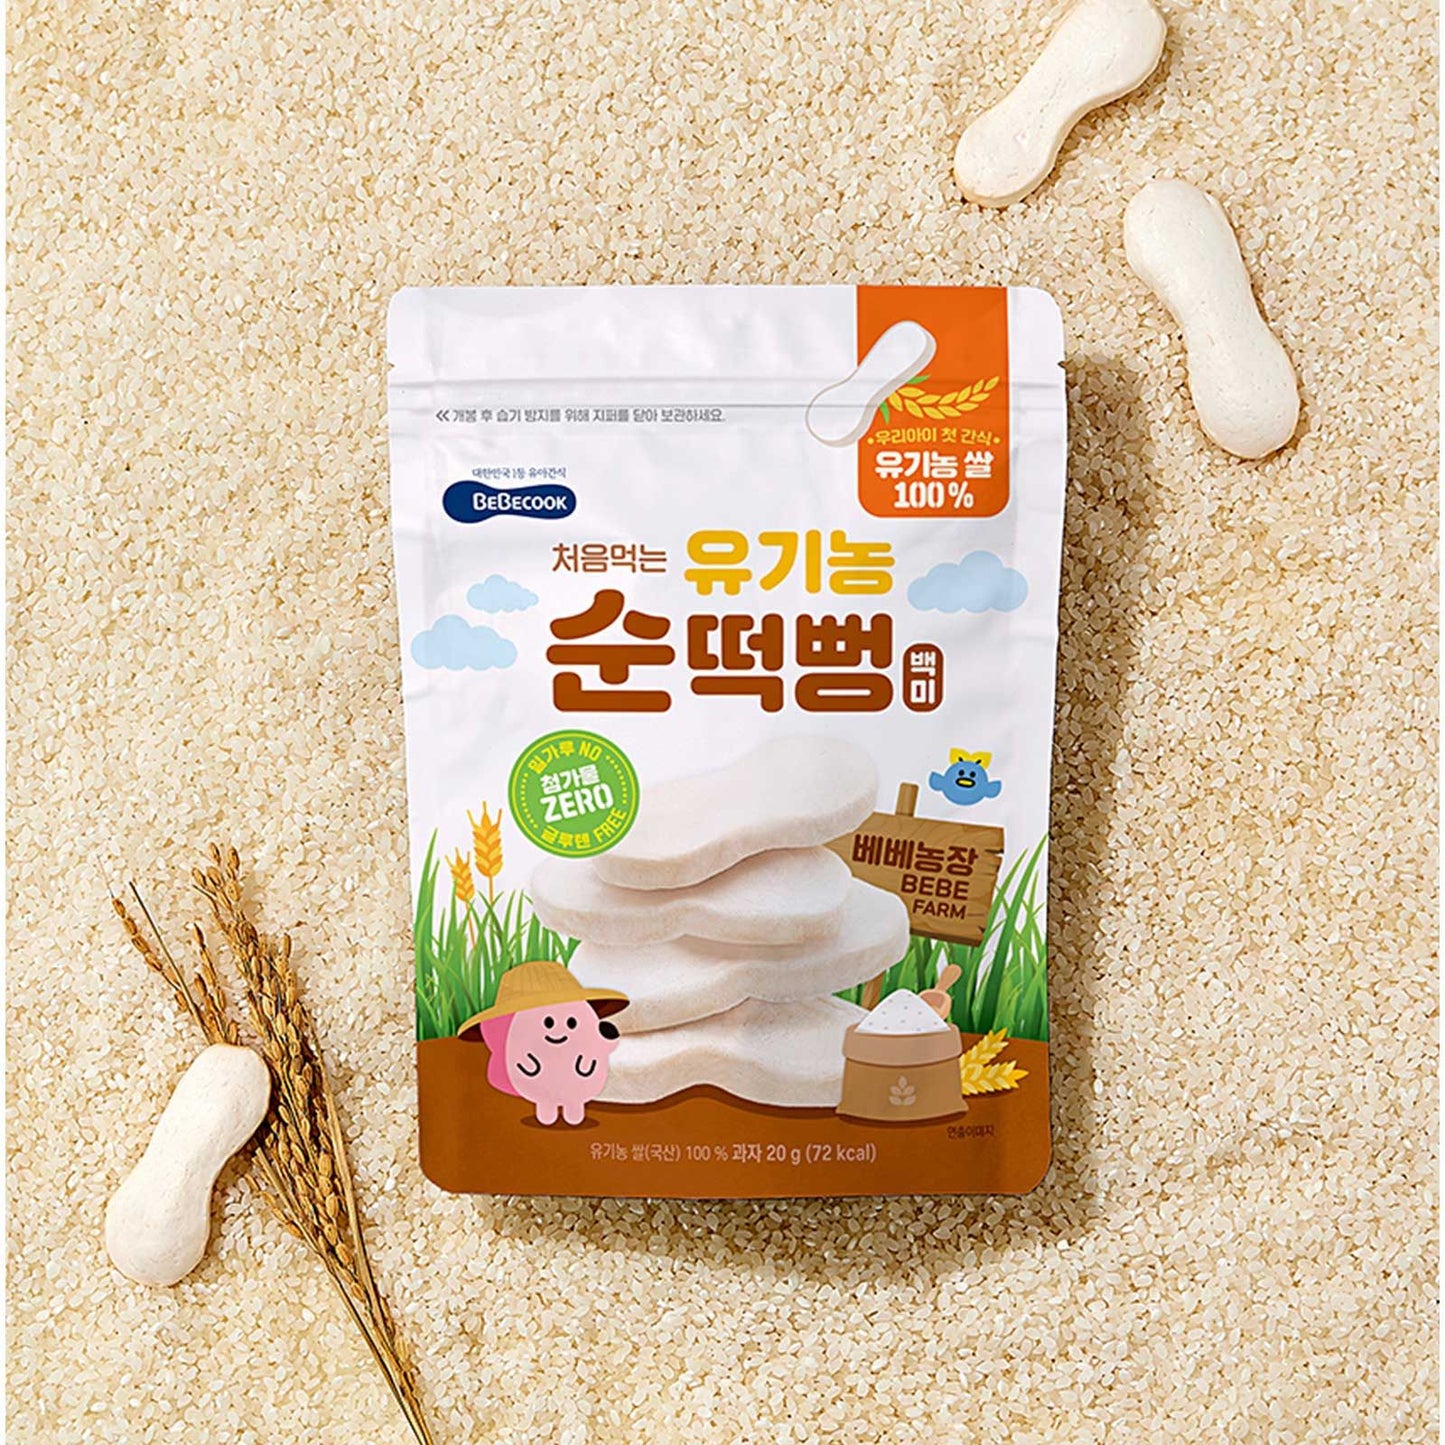 BeBecook - Organic First Pure Rice Rusk 20g